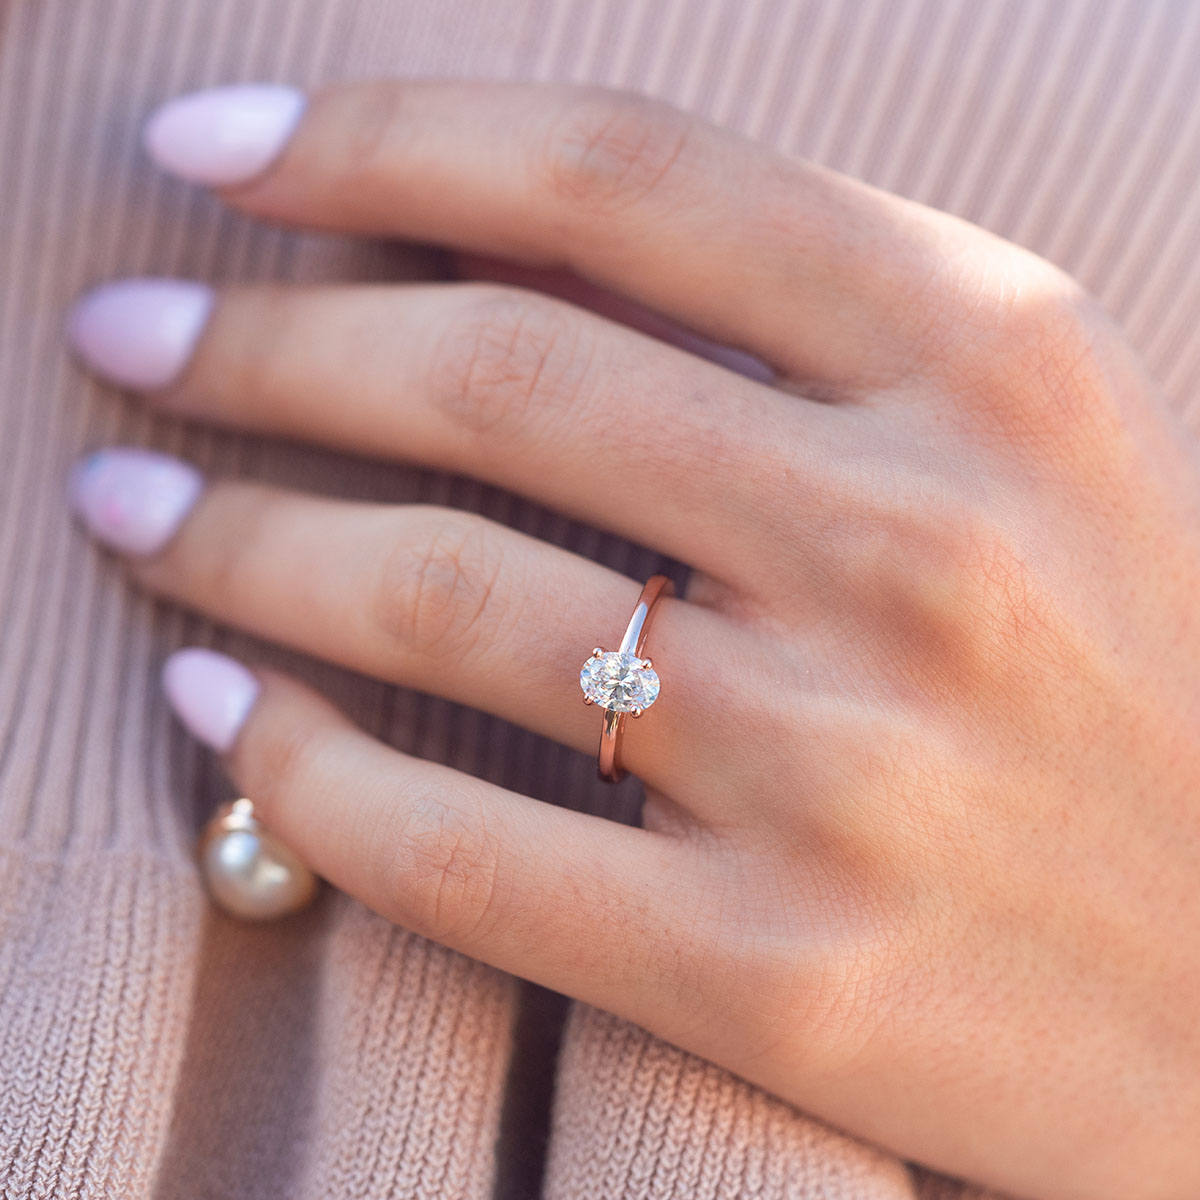 Oval rose gold ring on woman's hand